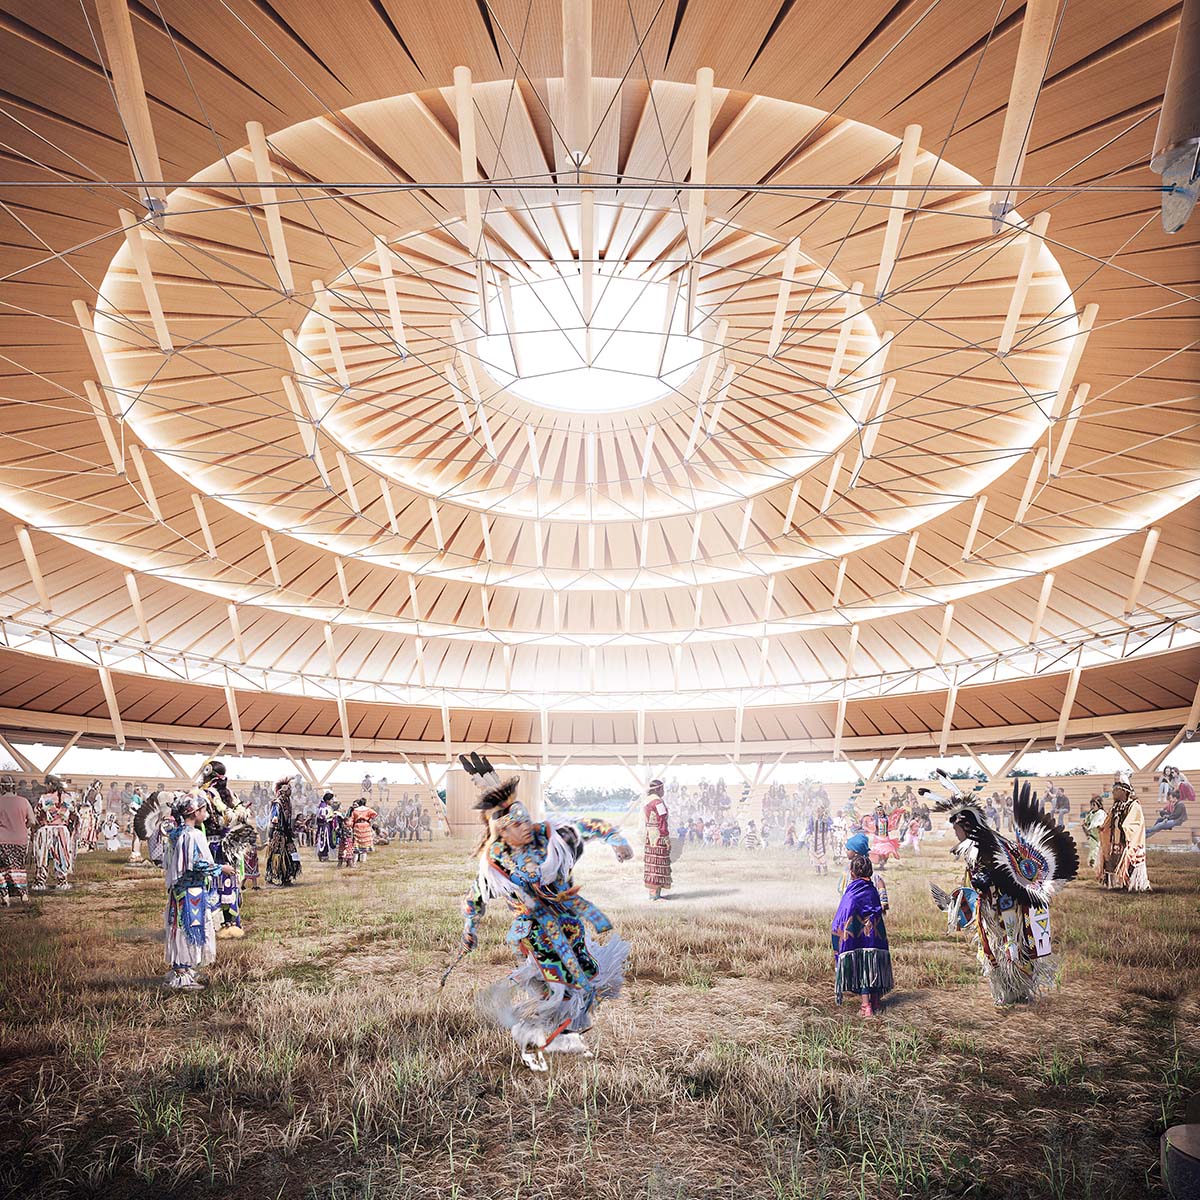 World Architecture Festival announces Day 2 winners for 2022